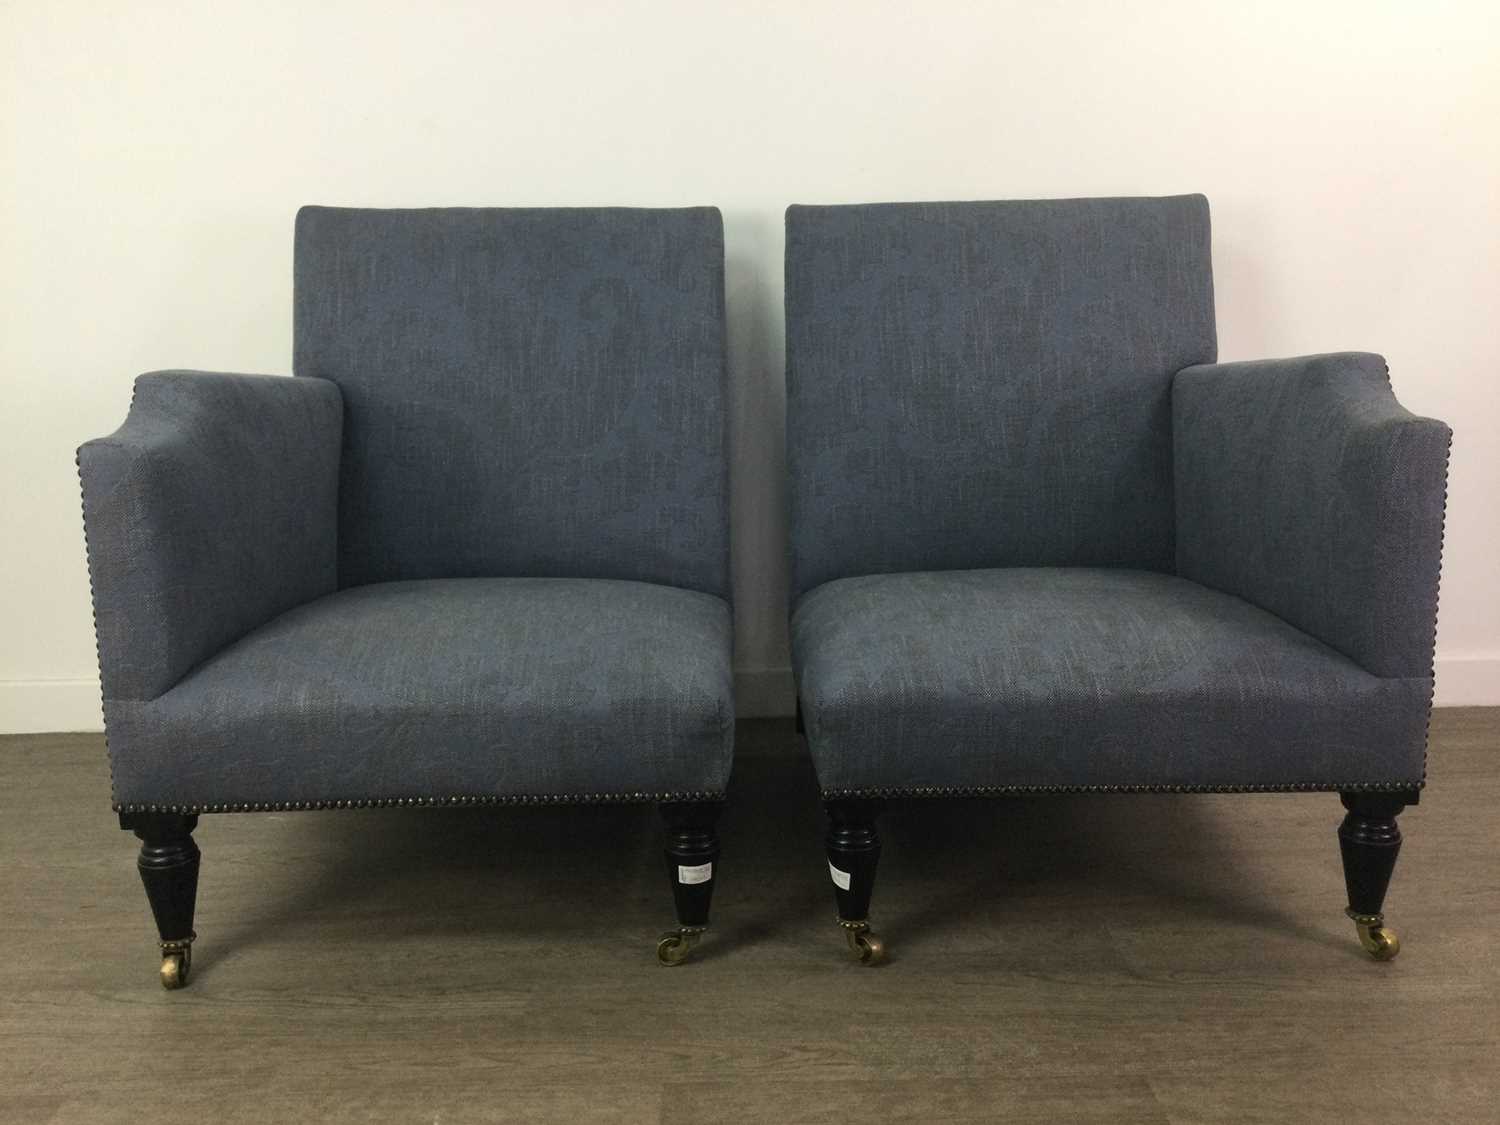 Lot A PAIR OF CORNER CHAIRS OF CONTEMPORARY DESIGN